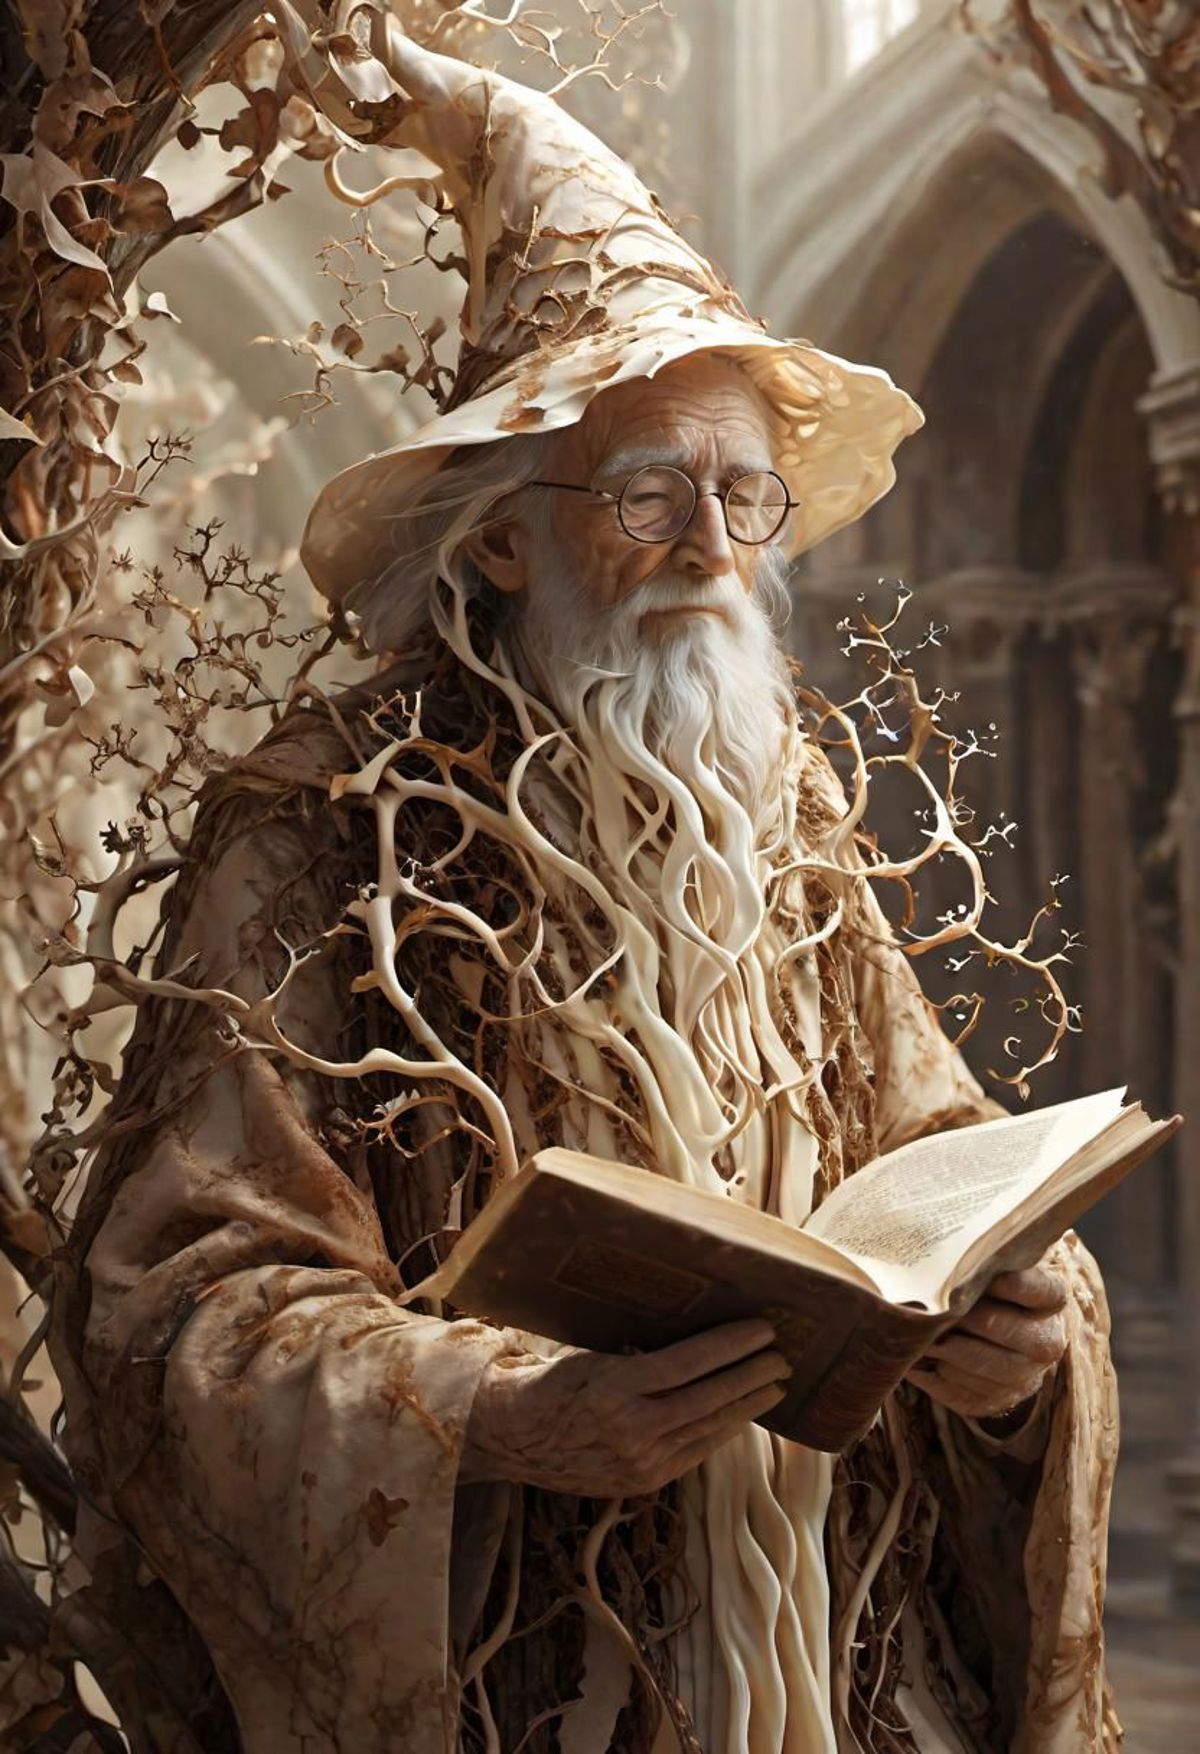 An Old Man Reading a Book with a Beard and Glasses